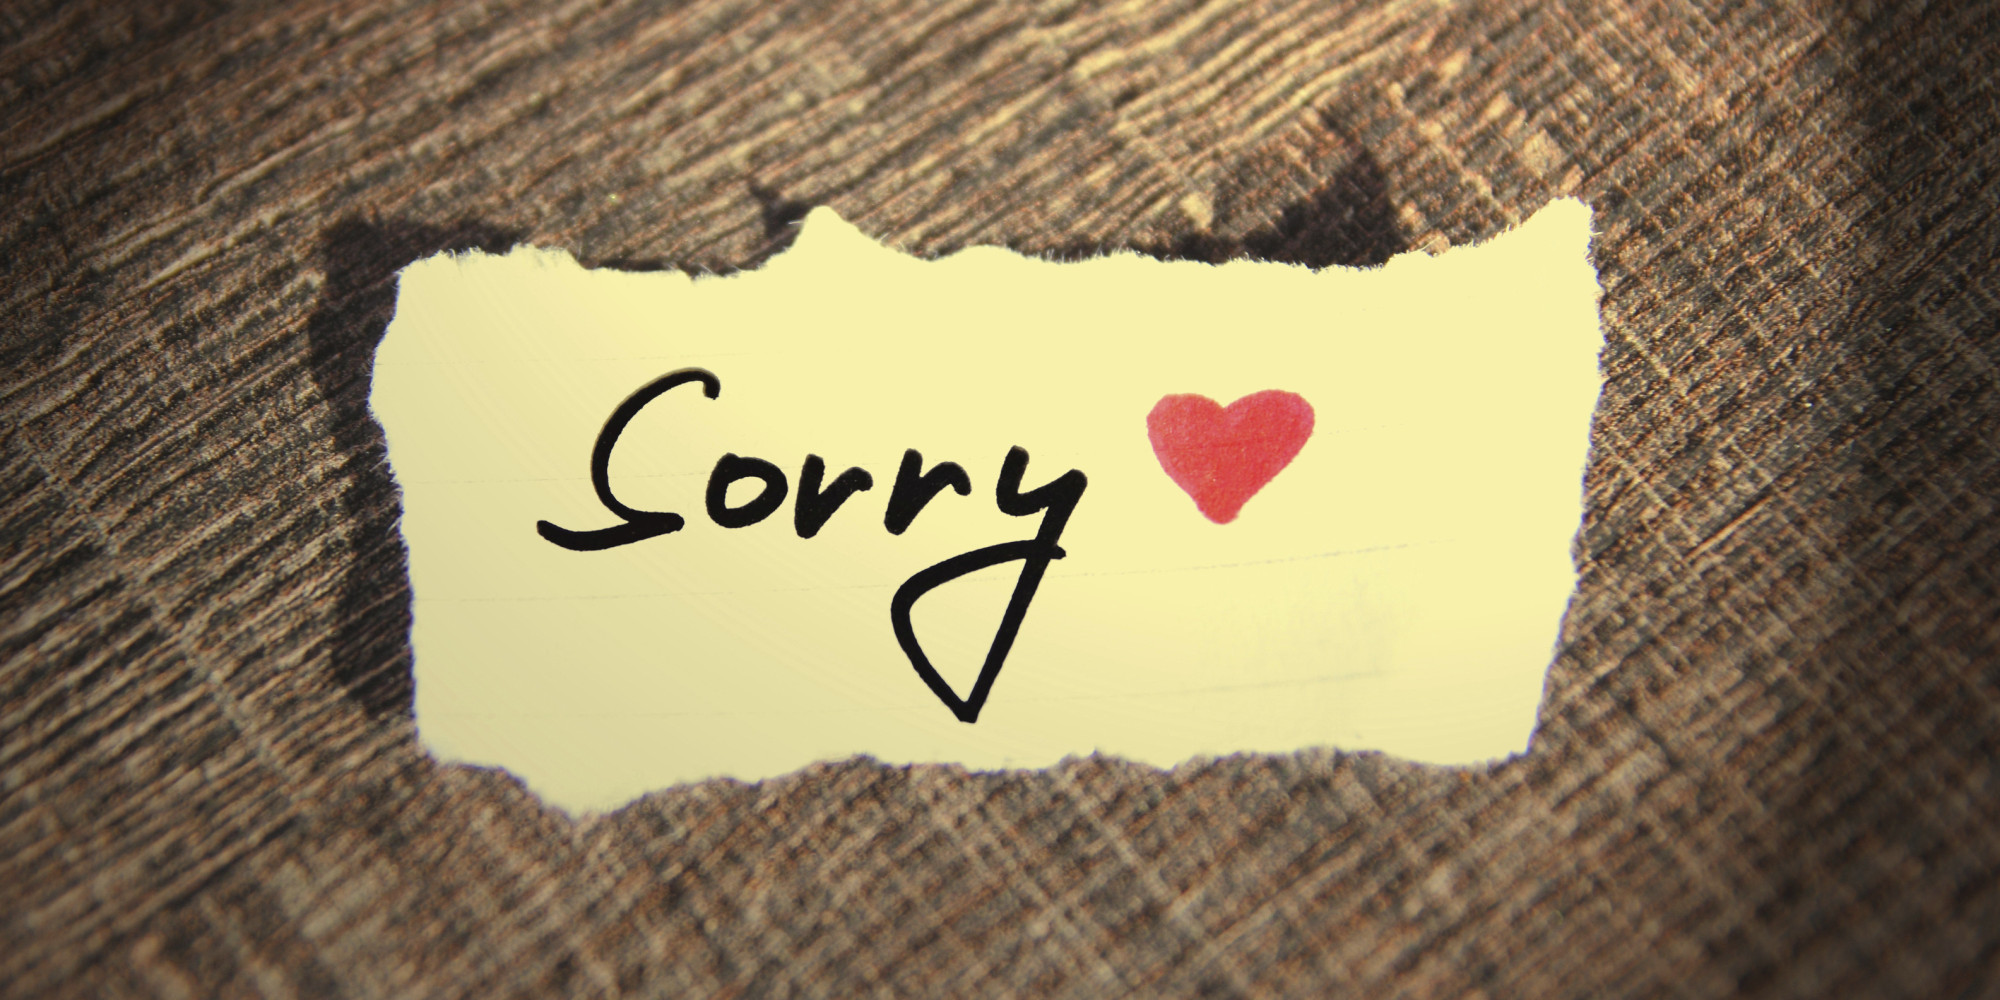 How To Apologize The Right Way